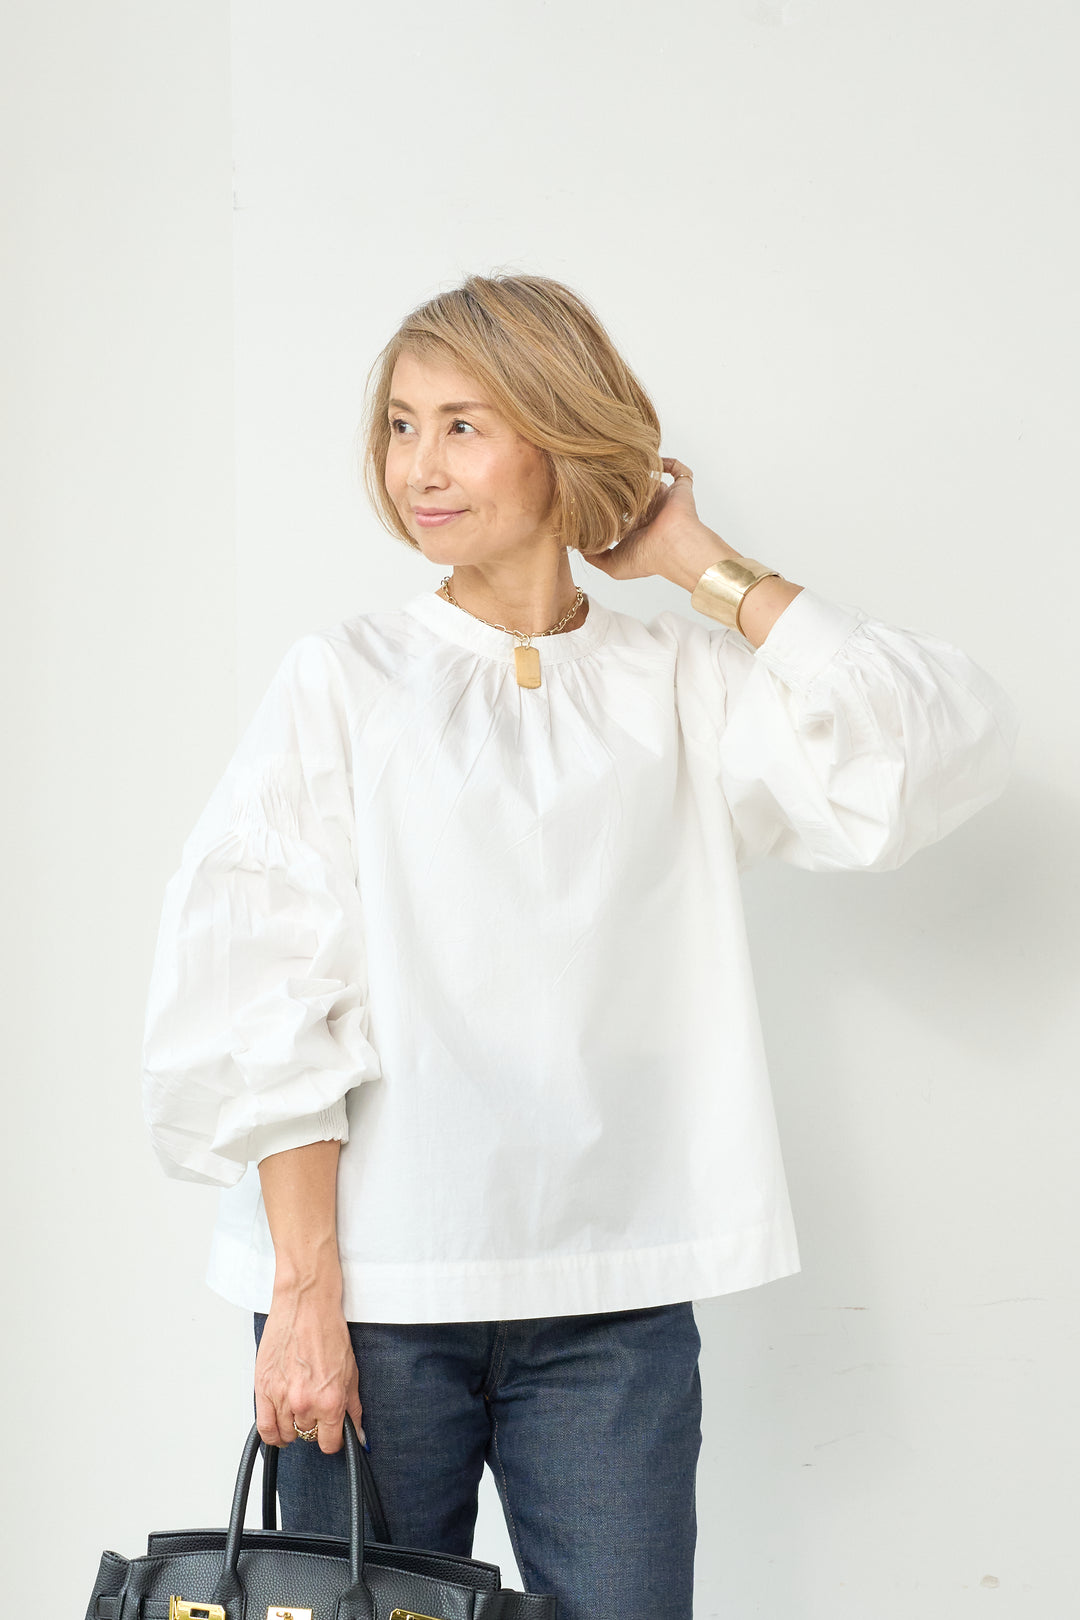 Front and back 2-way typewriter blouse